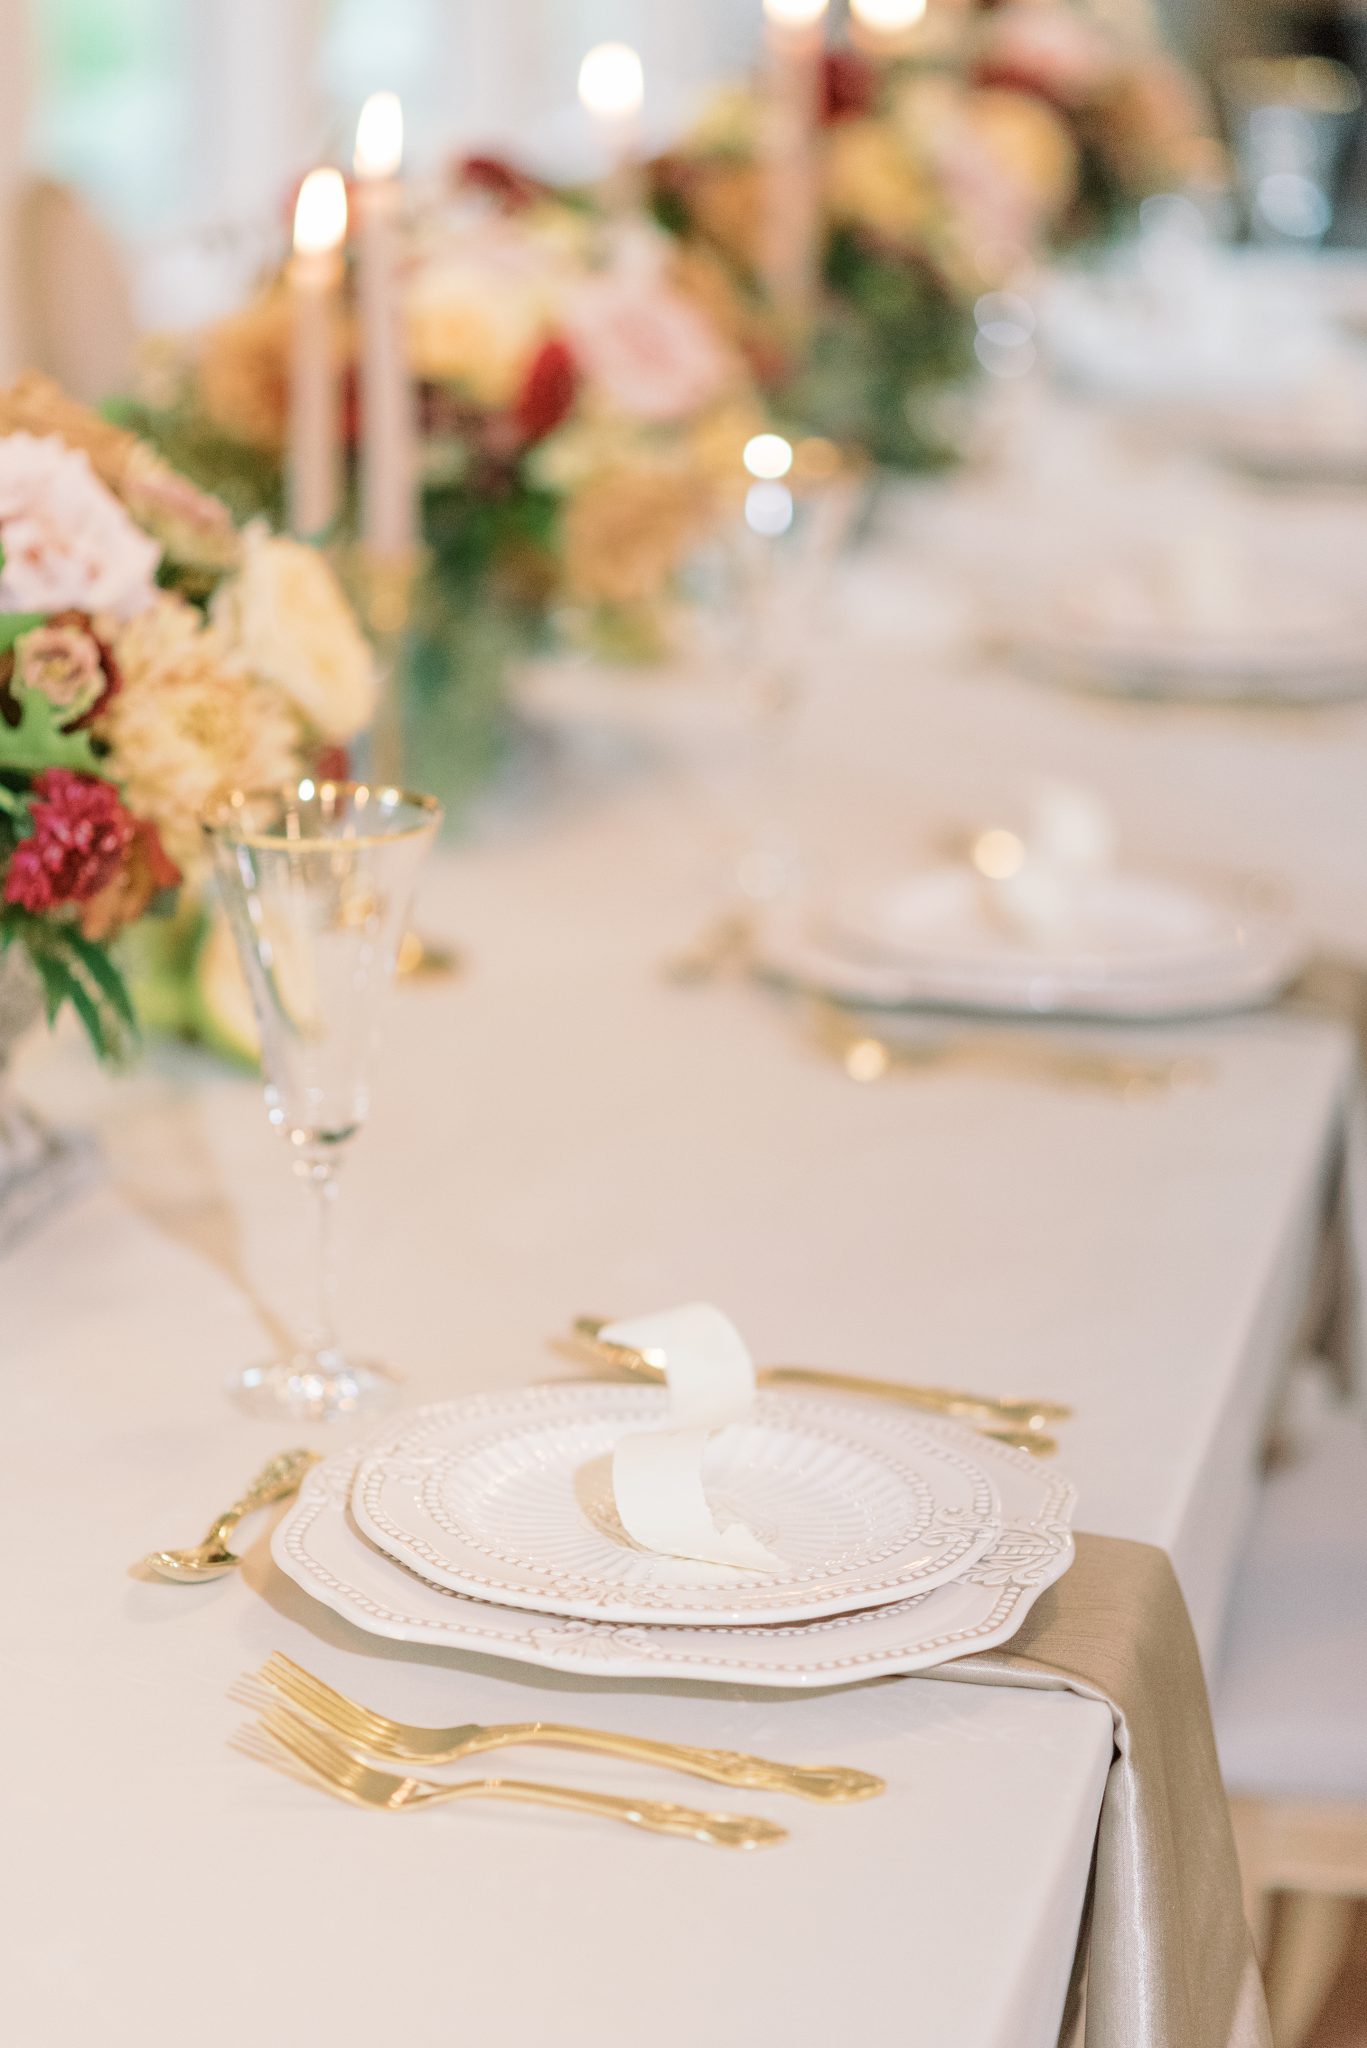 Wedding decor inspiration for an elegant and enchanting tablescape with gold and berry hues